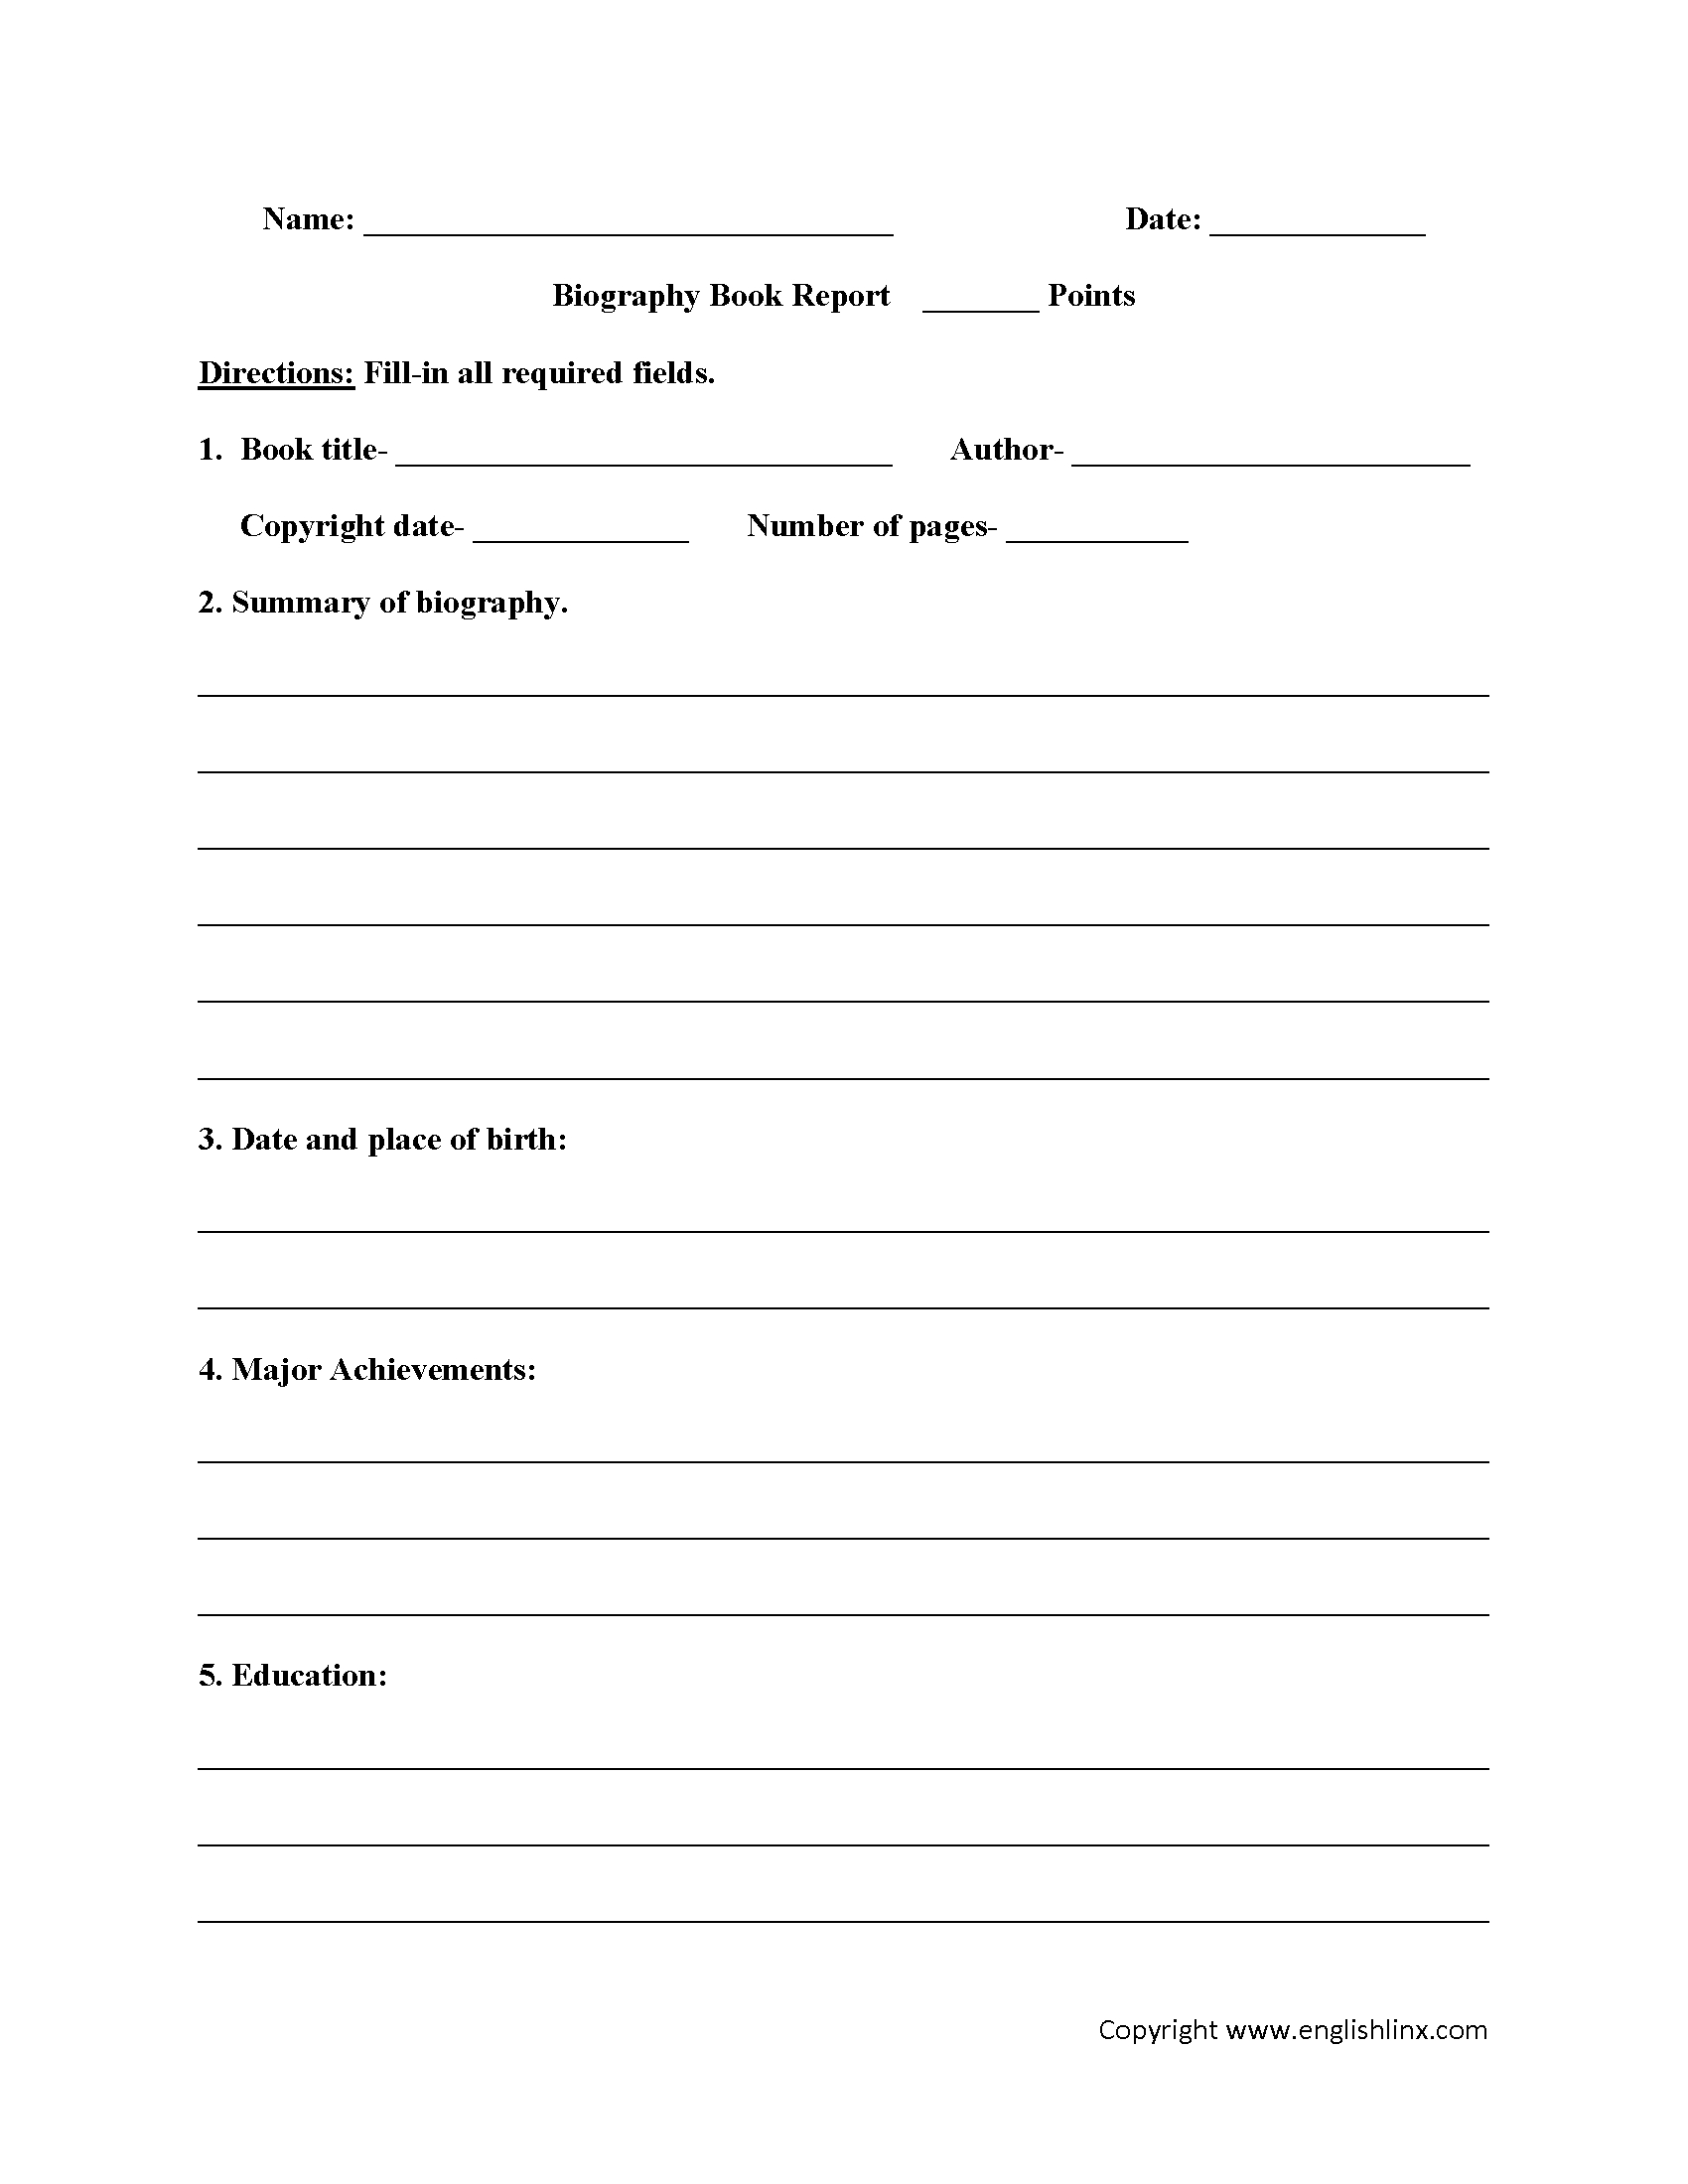 Englishlinx | Book Report Worksheets - Free Printable Book Report Forms For Elementary Students